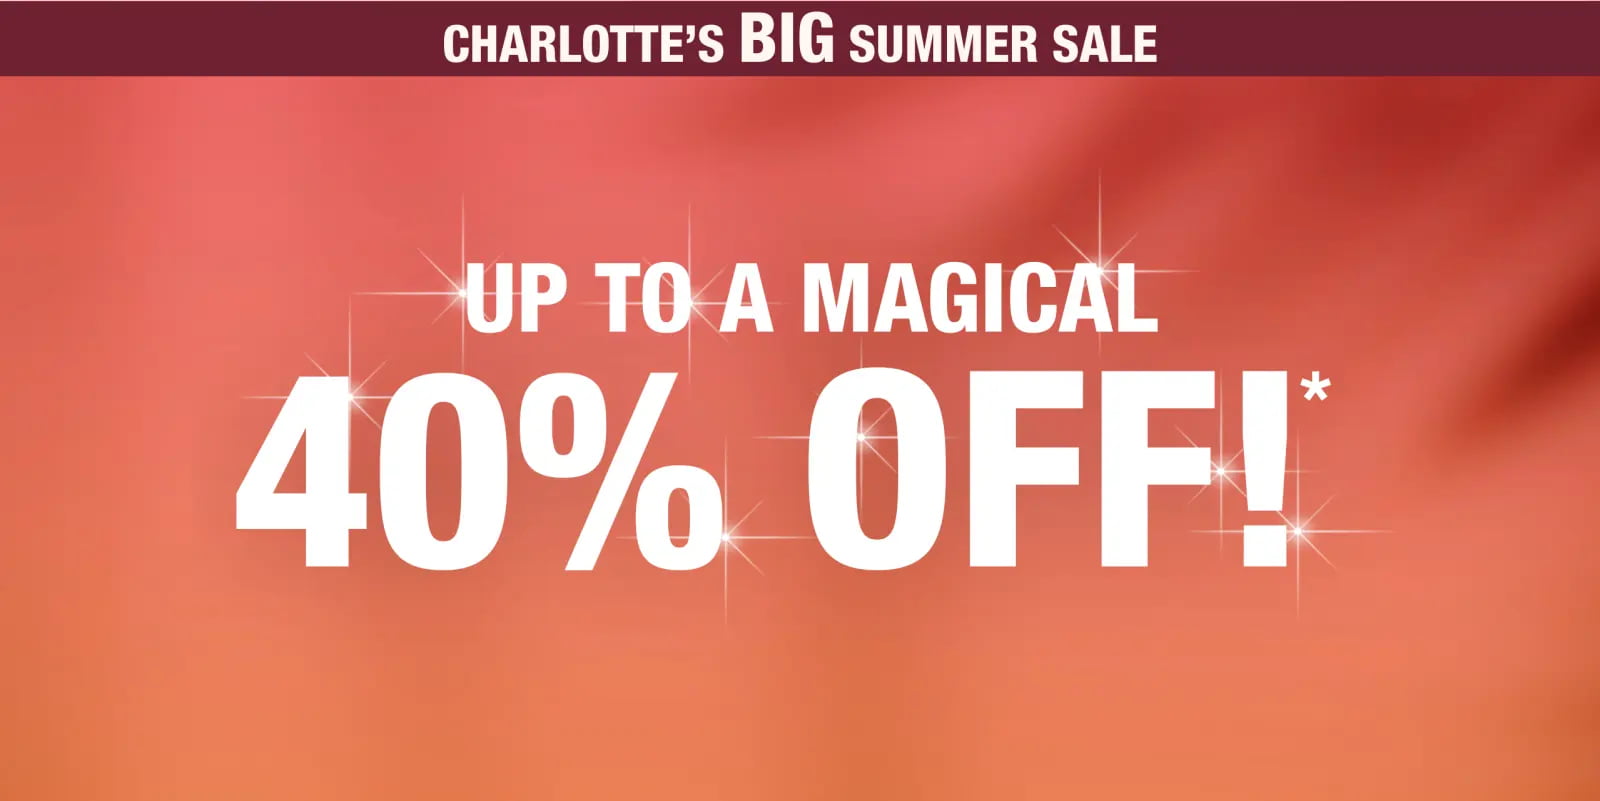 Up to 40% off Summer Sale at Charlotte Tilbury